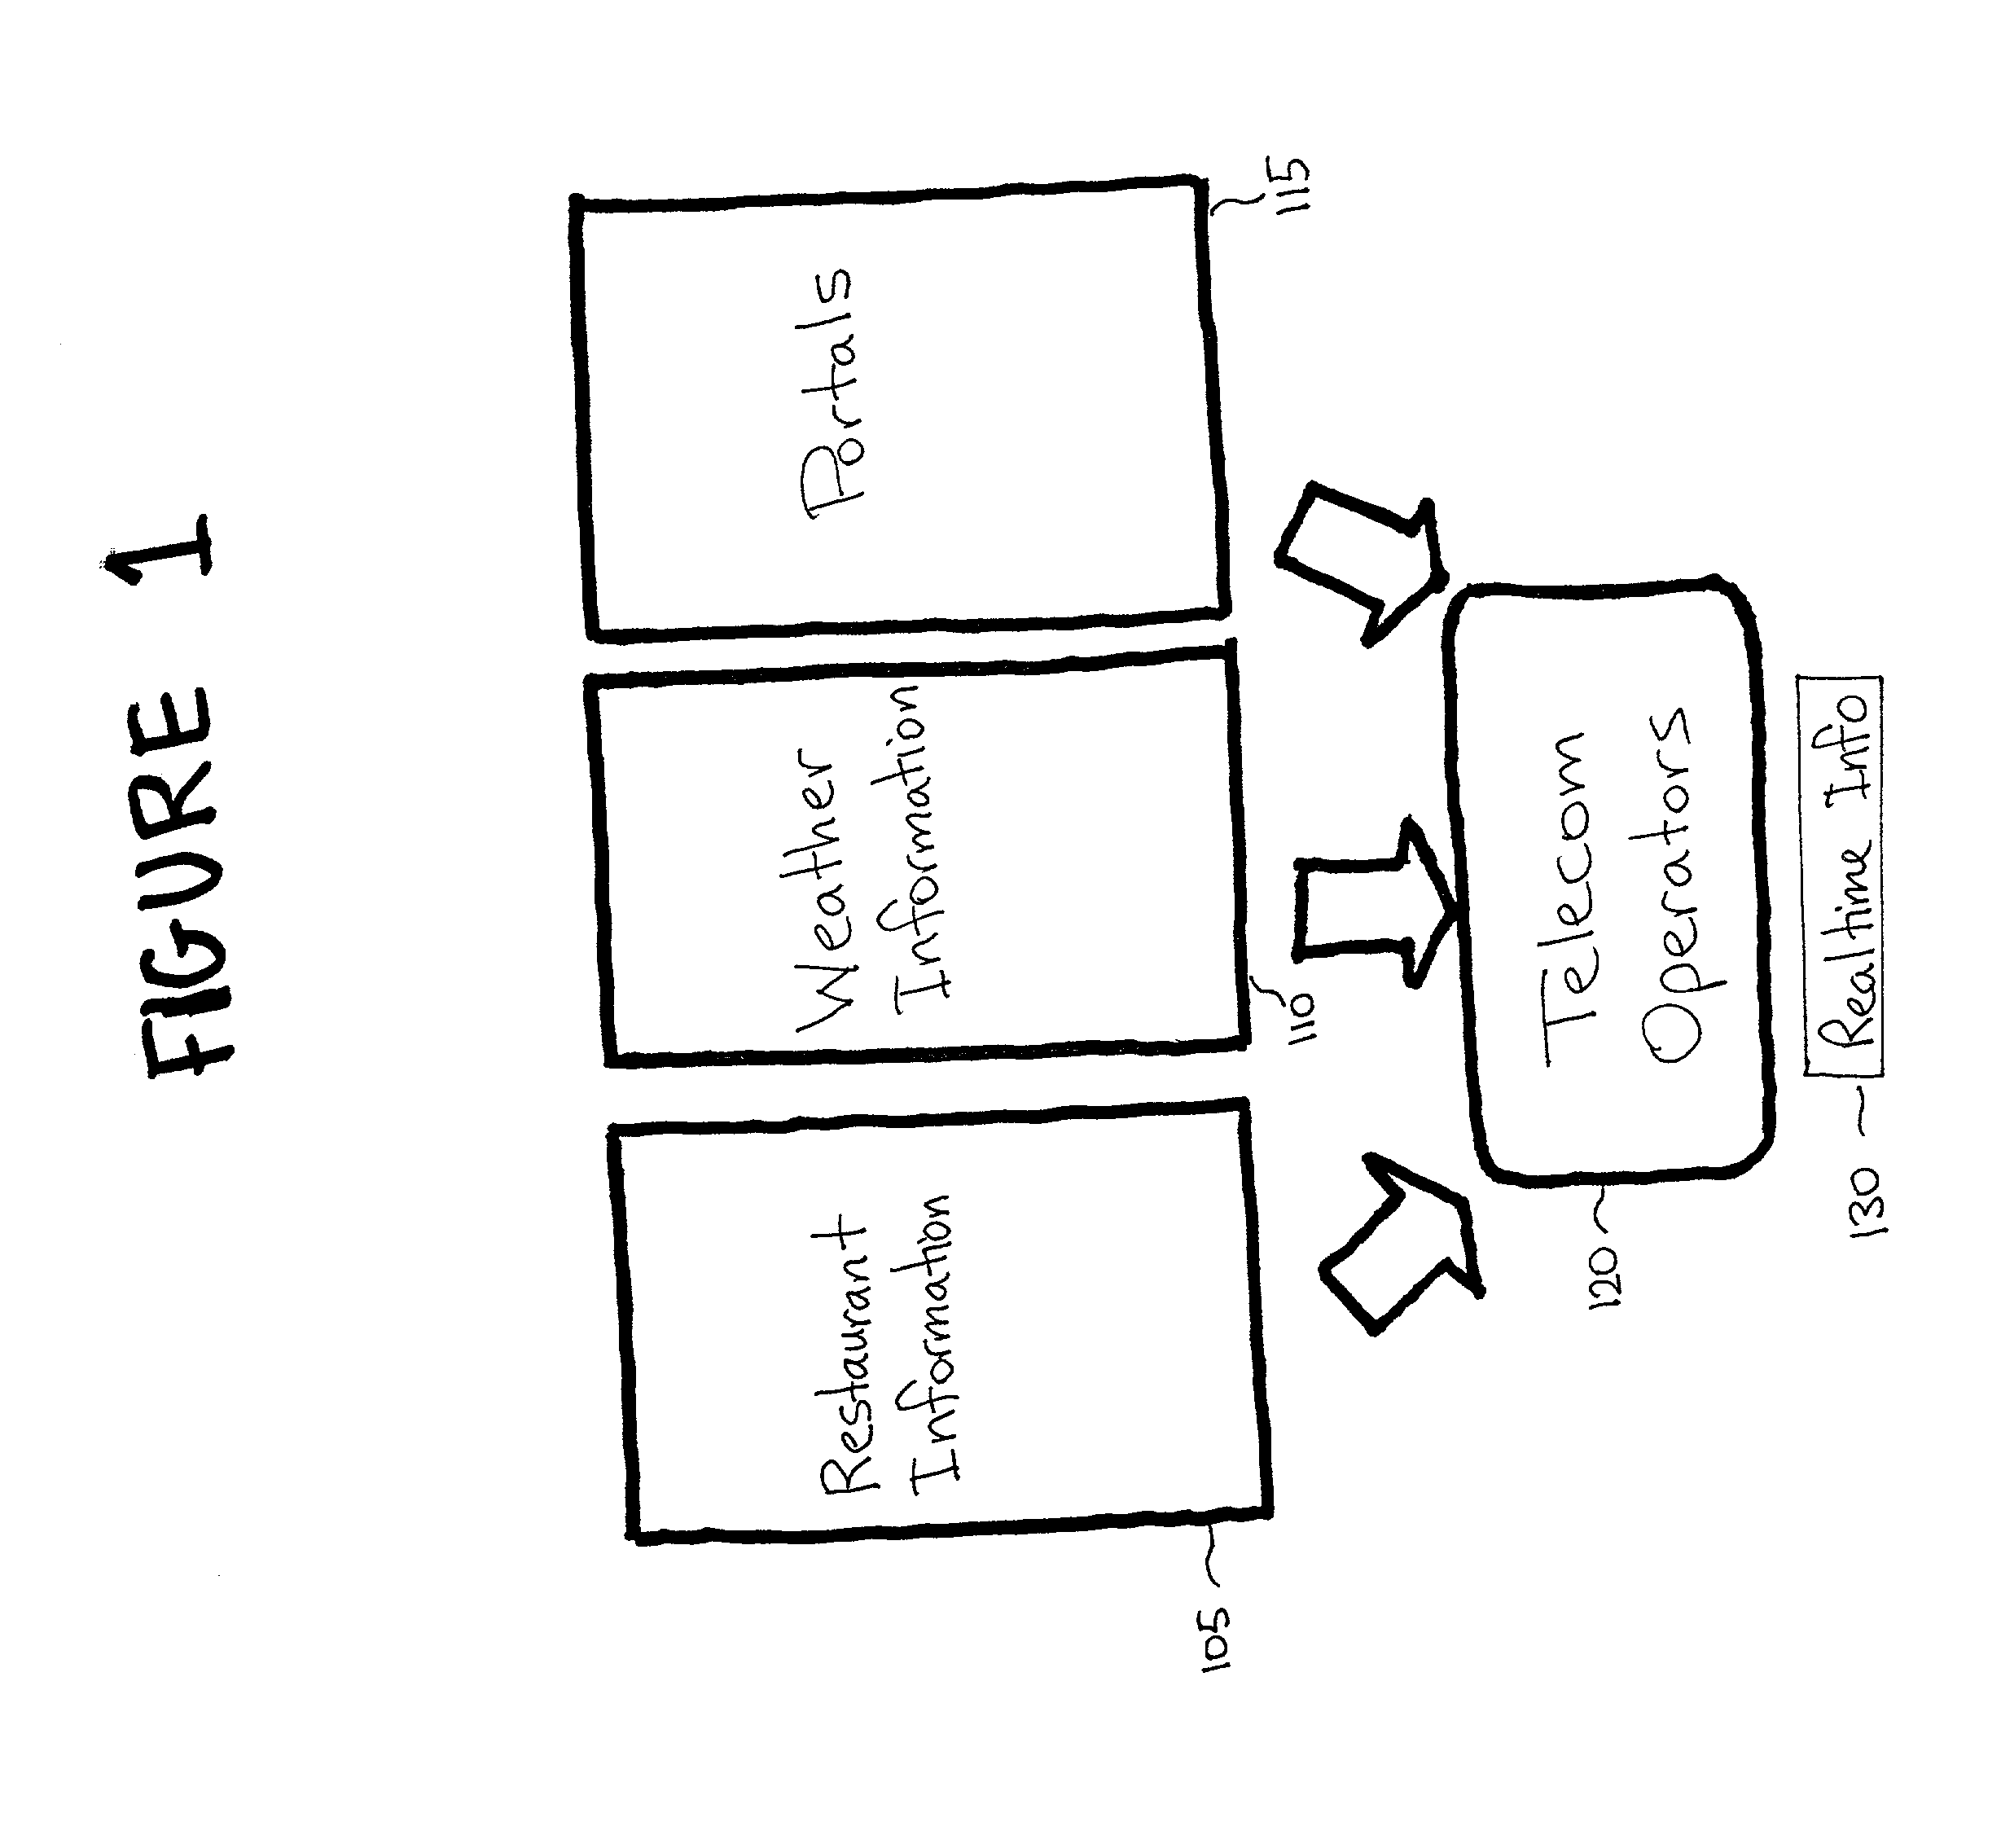 Apparatus for facilitating realtime information interexchange between a telecommunications network and a service provider